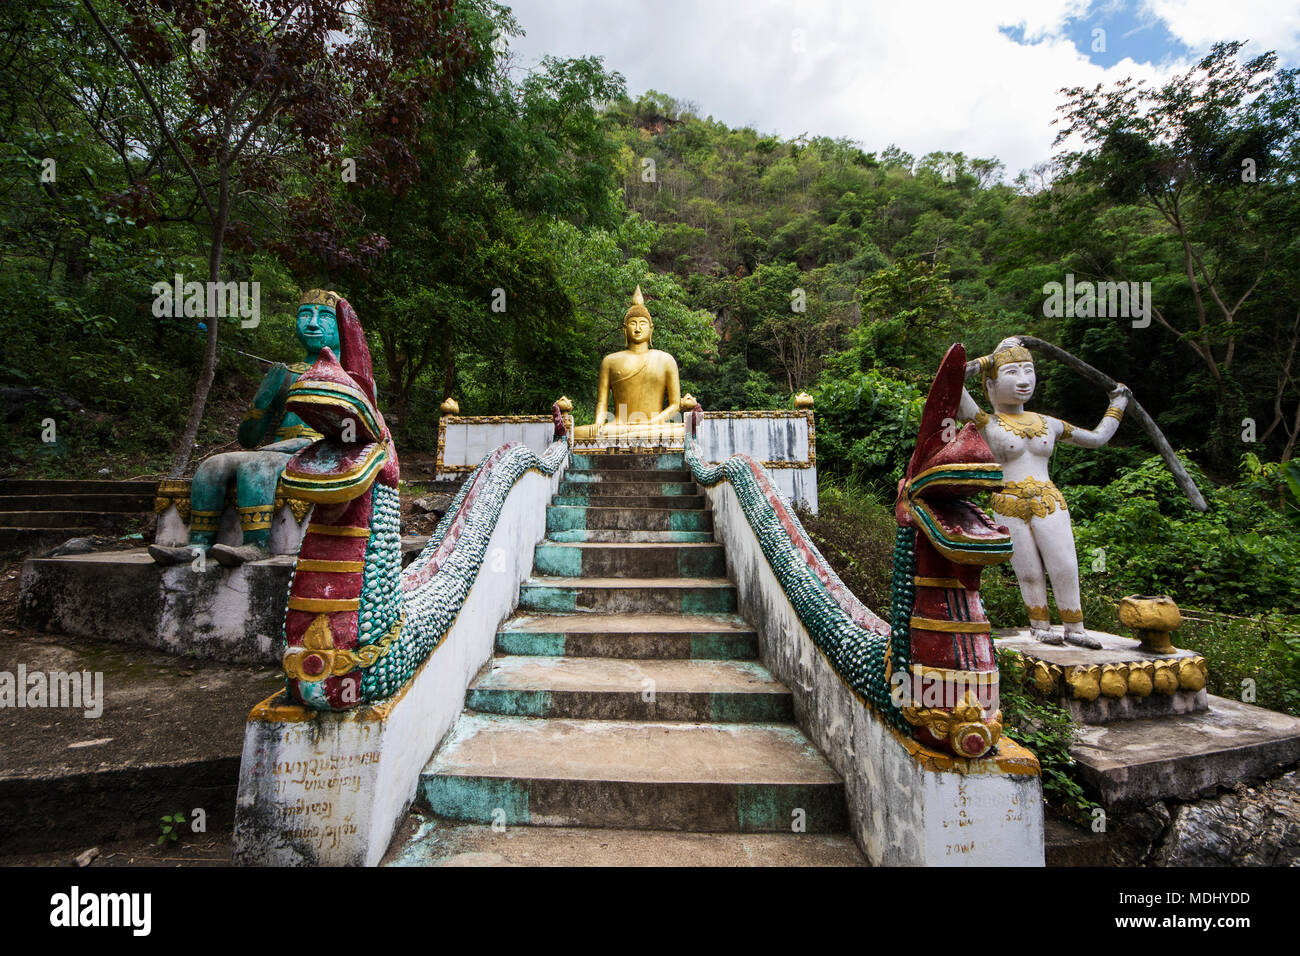 Memorial stupa by Tham Piu Cave, place where on 24 November 1969, a single rocket fired from a US aircraft killed an estimated 374 people who had t... Stock Photo